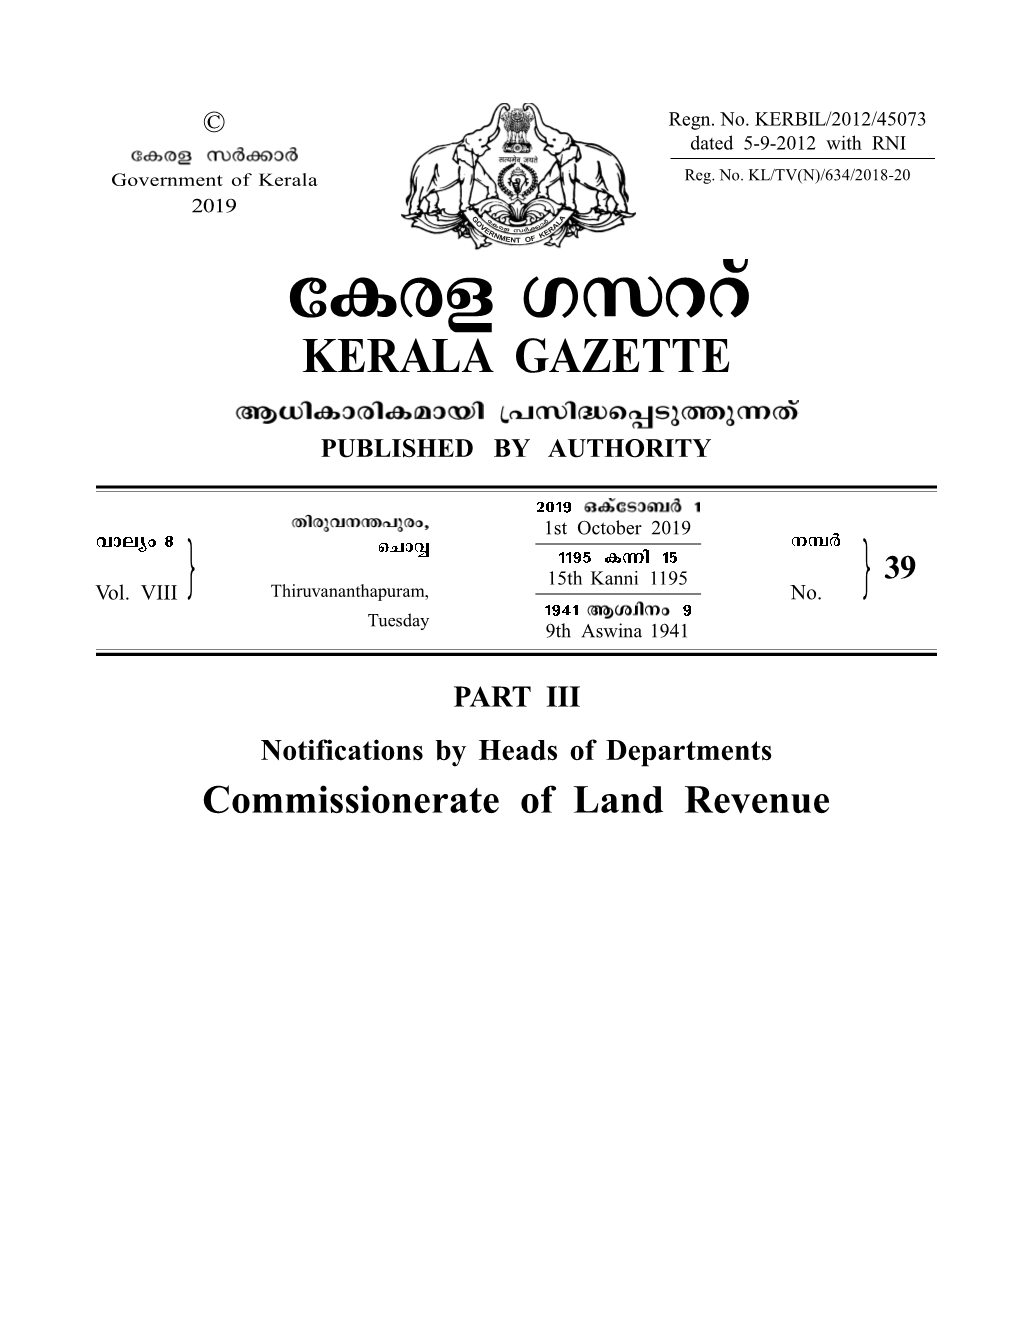 Kasaragod Residing at Kalanad Village Has Filed an Application for Legal Heirship Certificate in Respect of the Legal Heirs of M